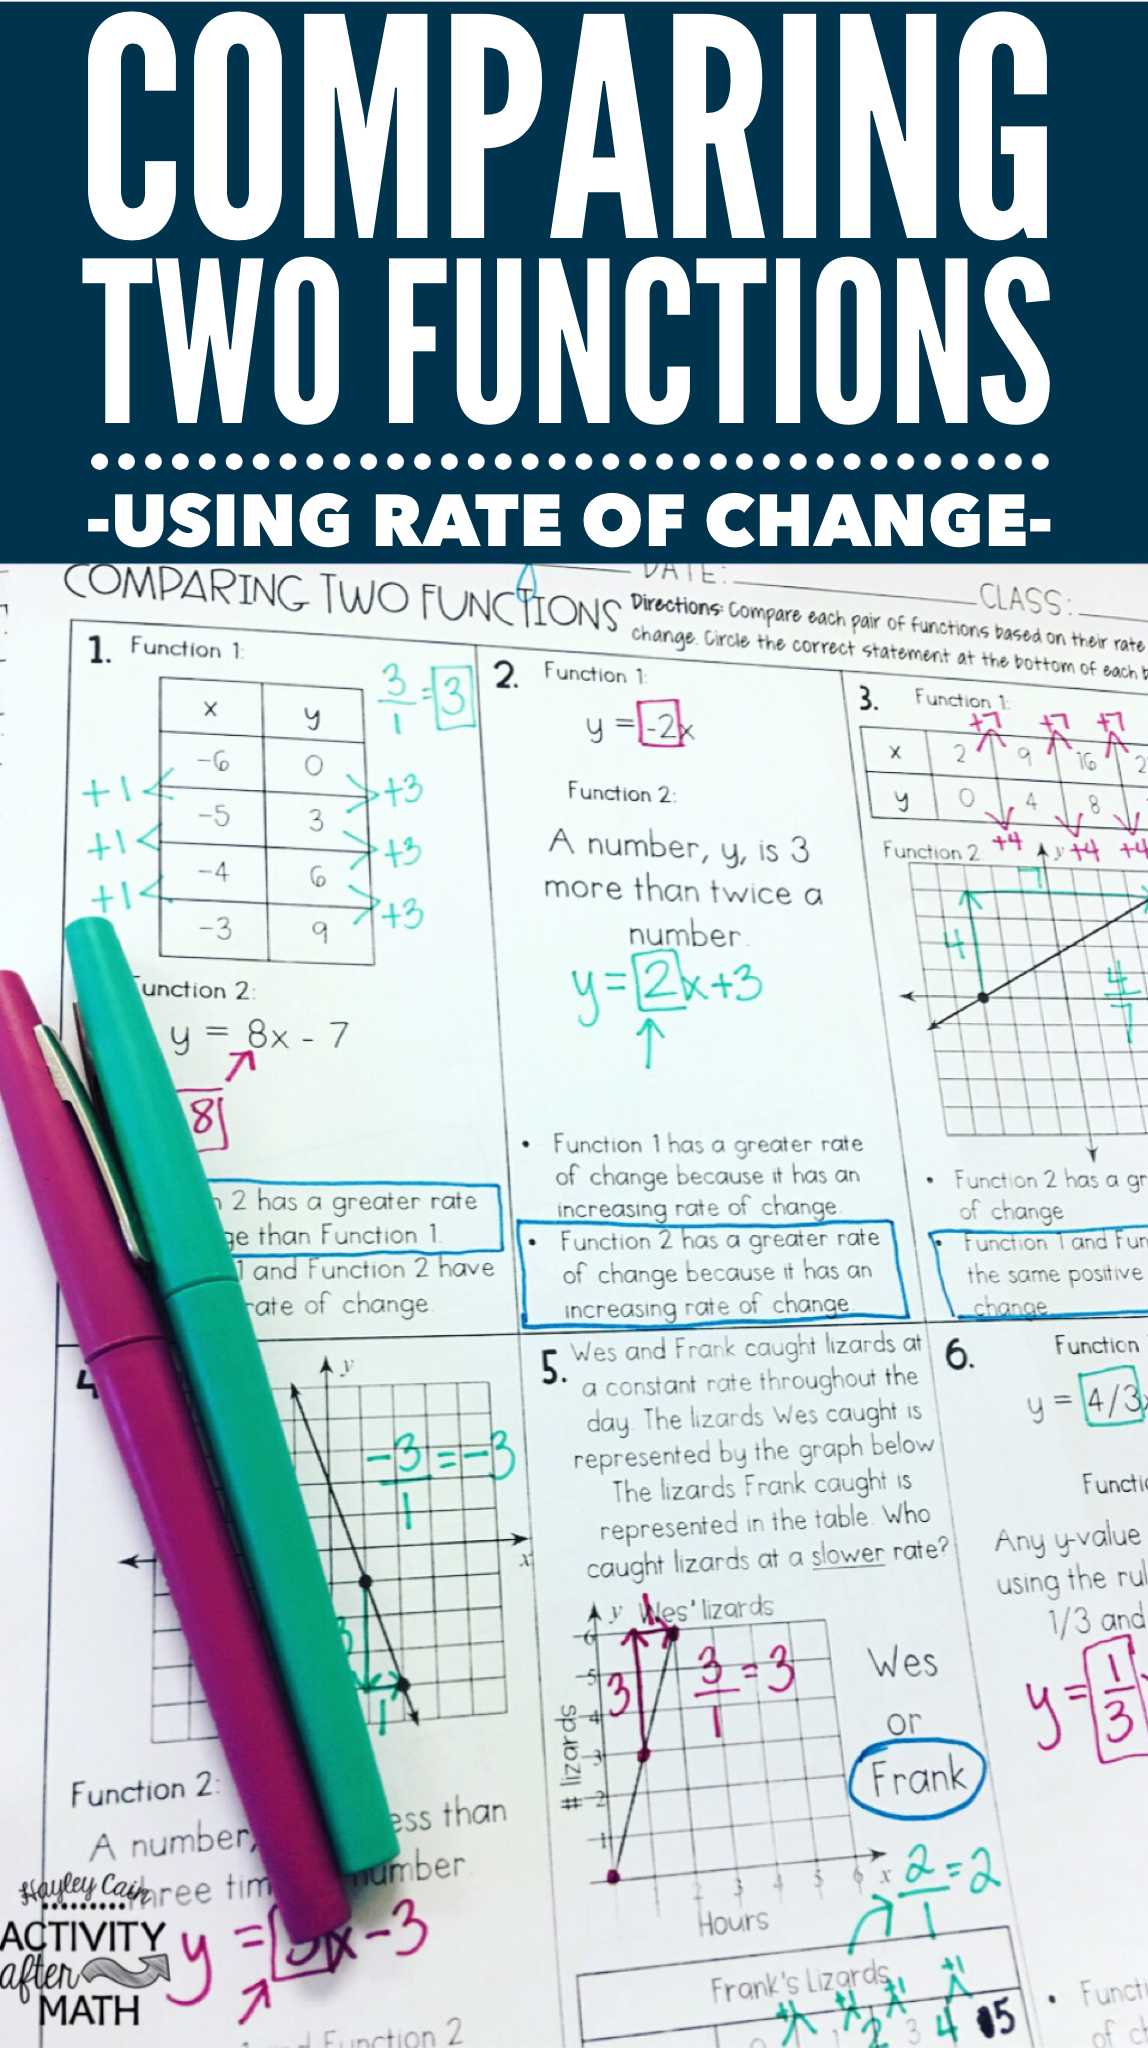 Systems Of Linear Equations Worksheet Along with Paring Two Functions by Rate Of Change Practice Worksheet